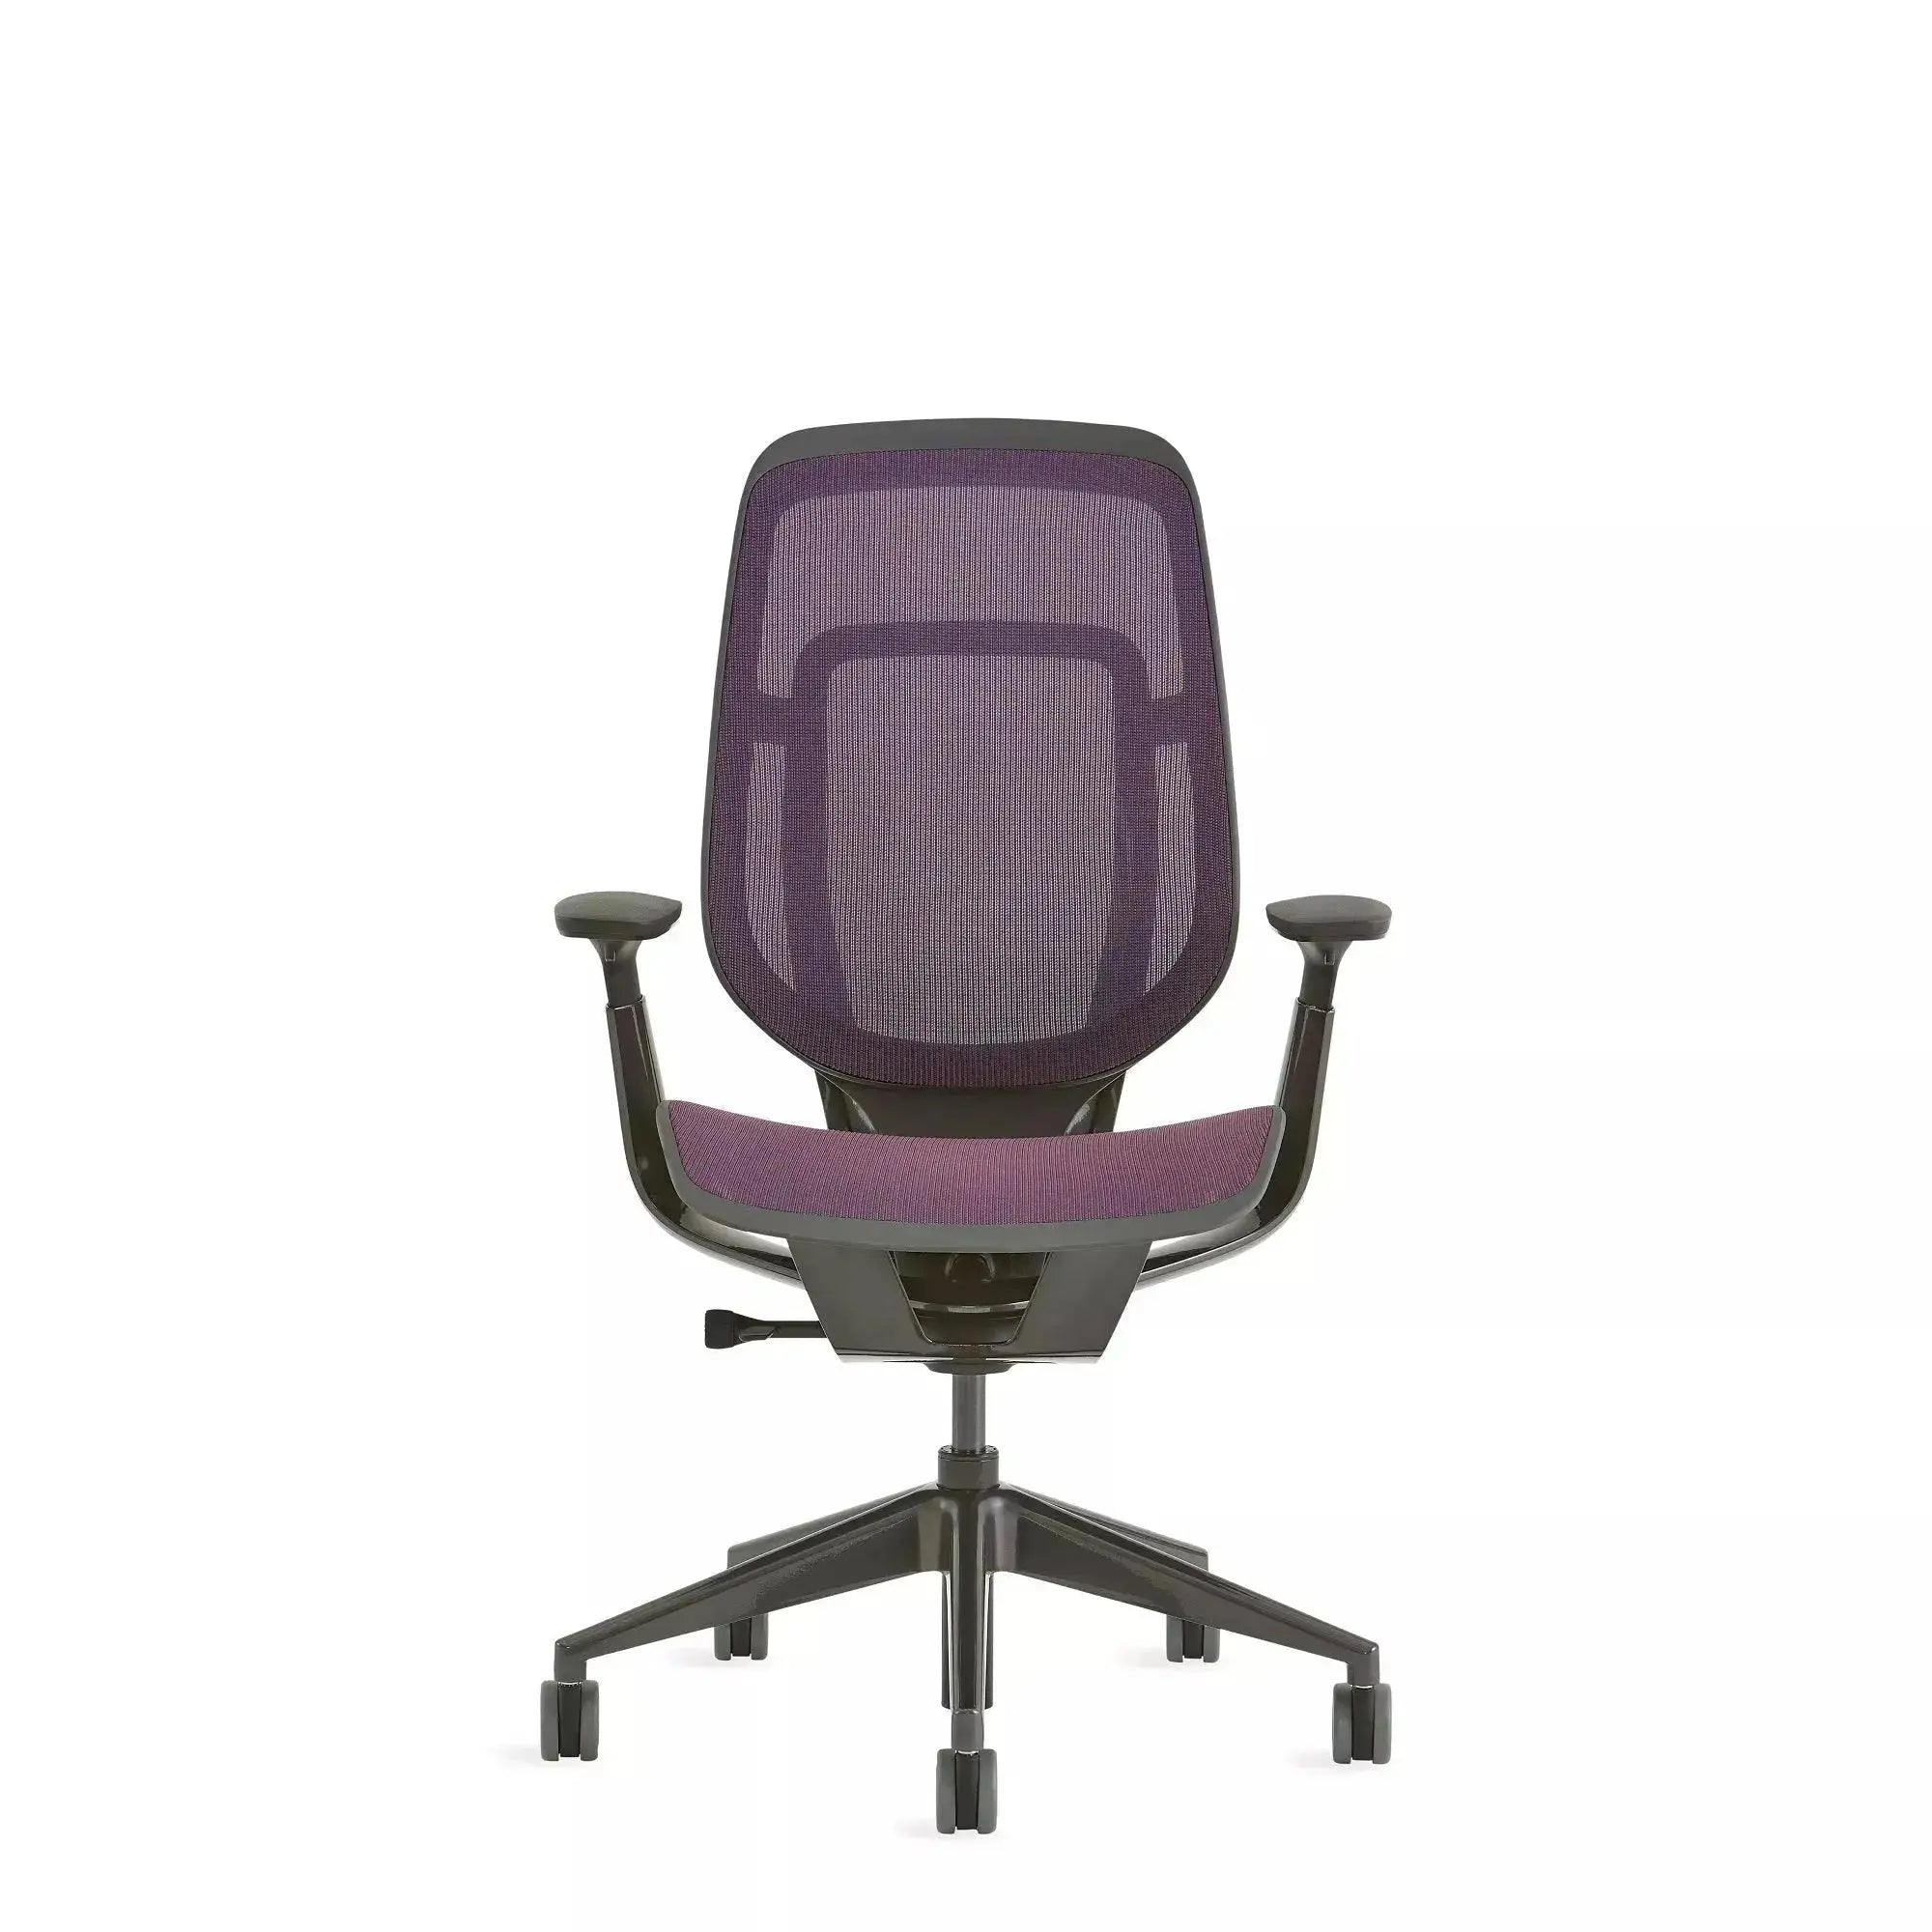 Steelcase Karman Intermix Shift - Red-Blue Shift/Merle/Obsidian Office Chairs